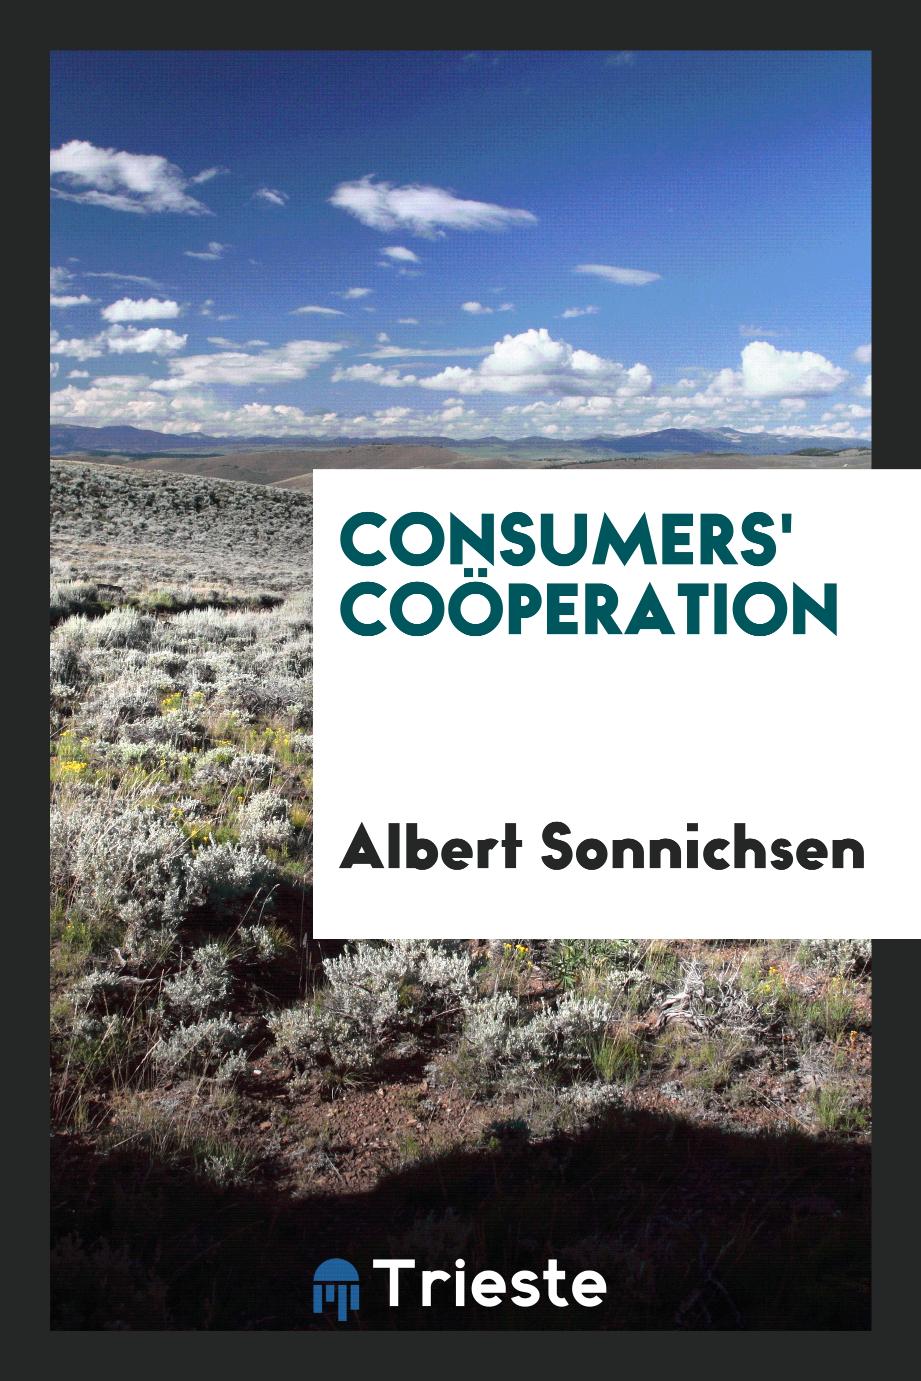 Consumers' coöperation